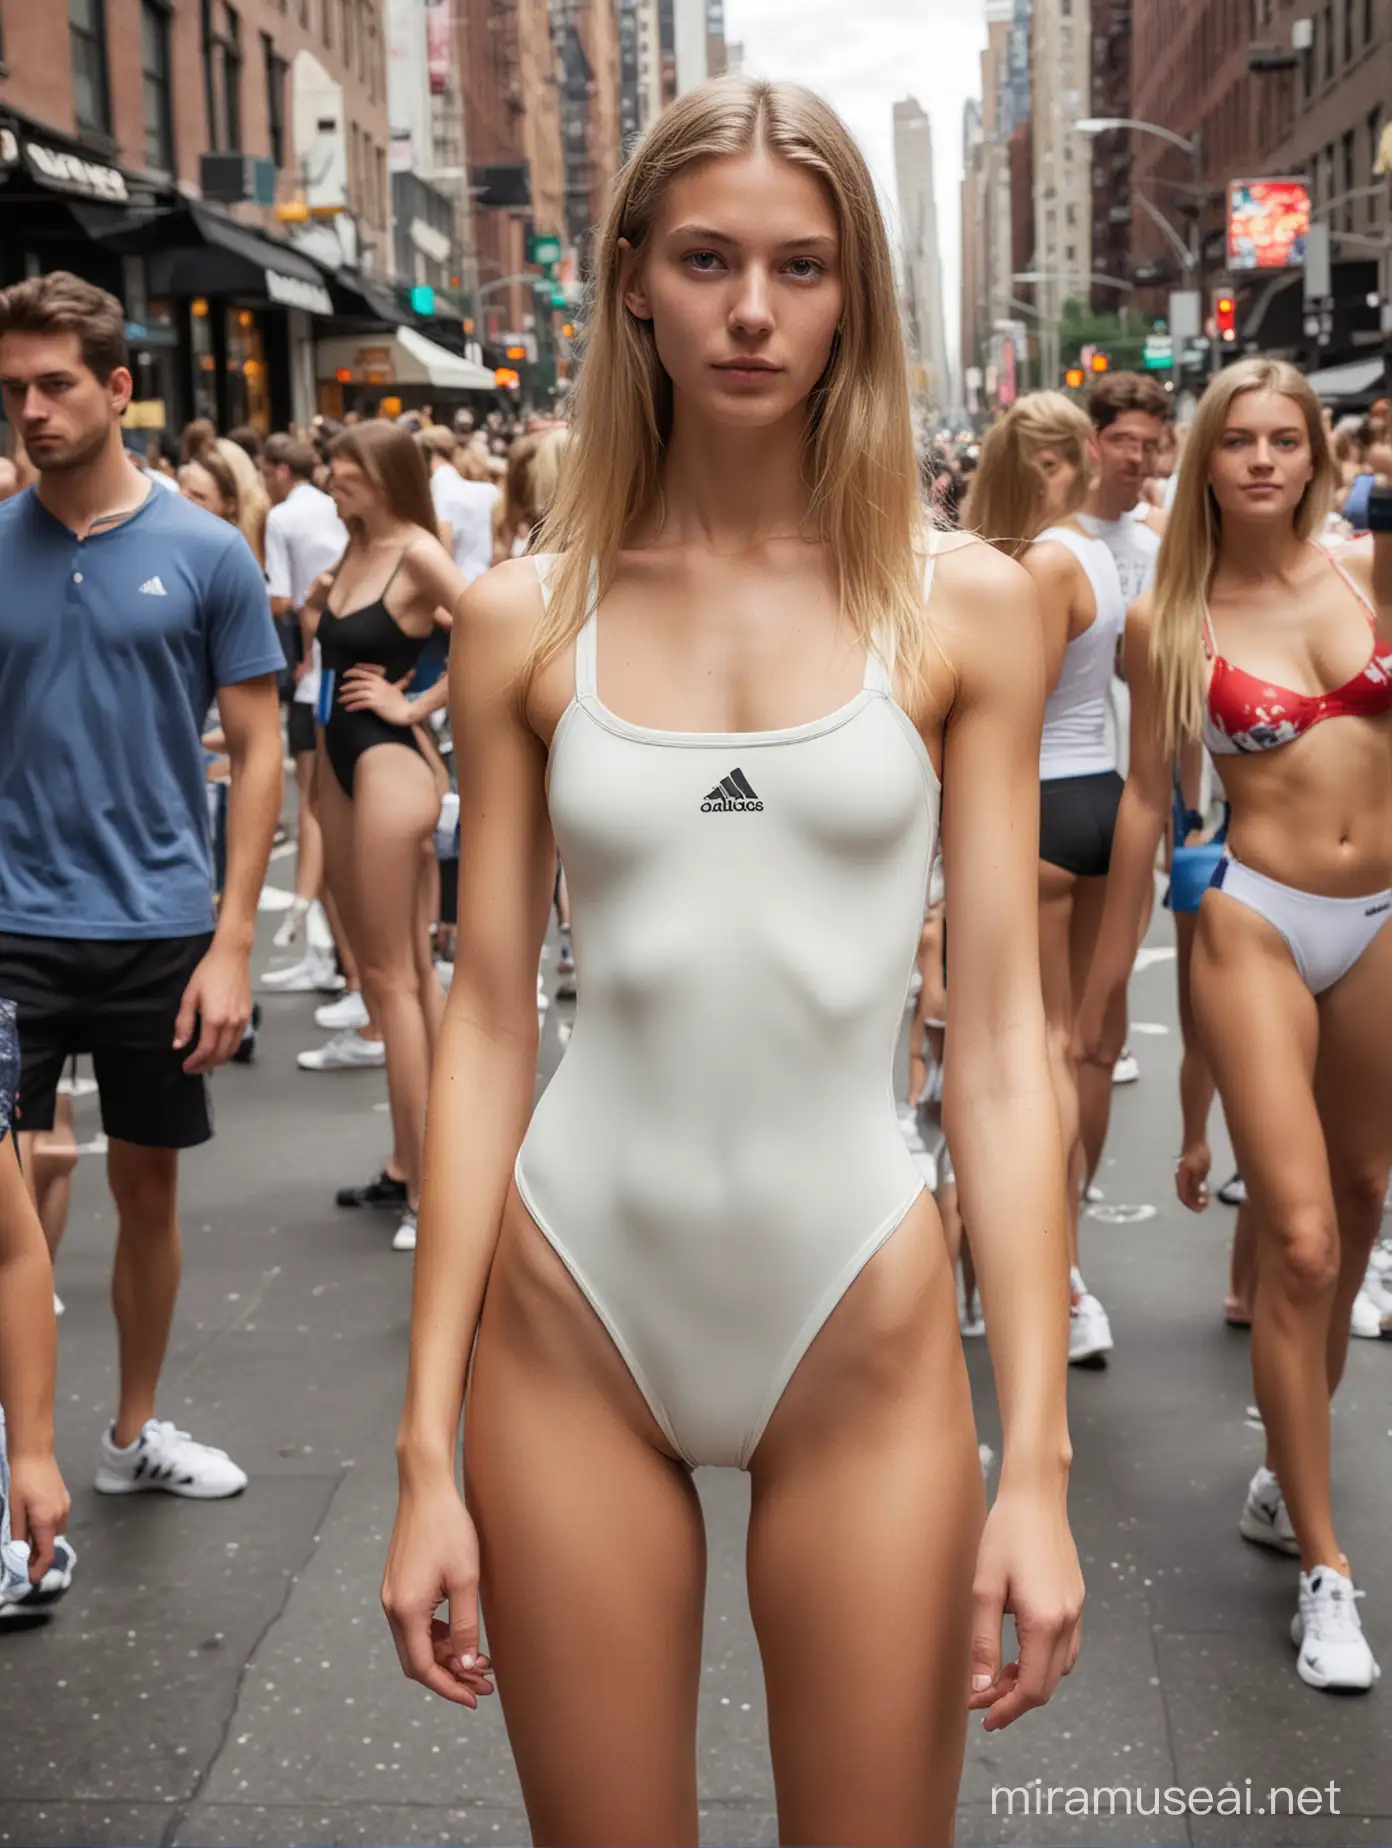 Pretty beautiful, skinny tall 19-year-old Nordic woman model with long hair, wearing a small skimpy Adidas super-high-cut  one-piece swimsuit, standing in a crowded street in New York,